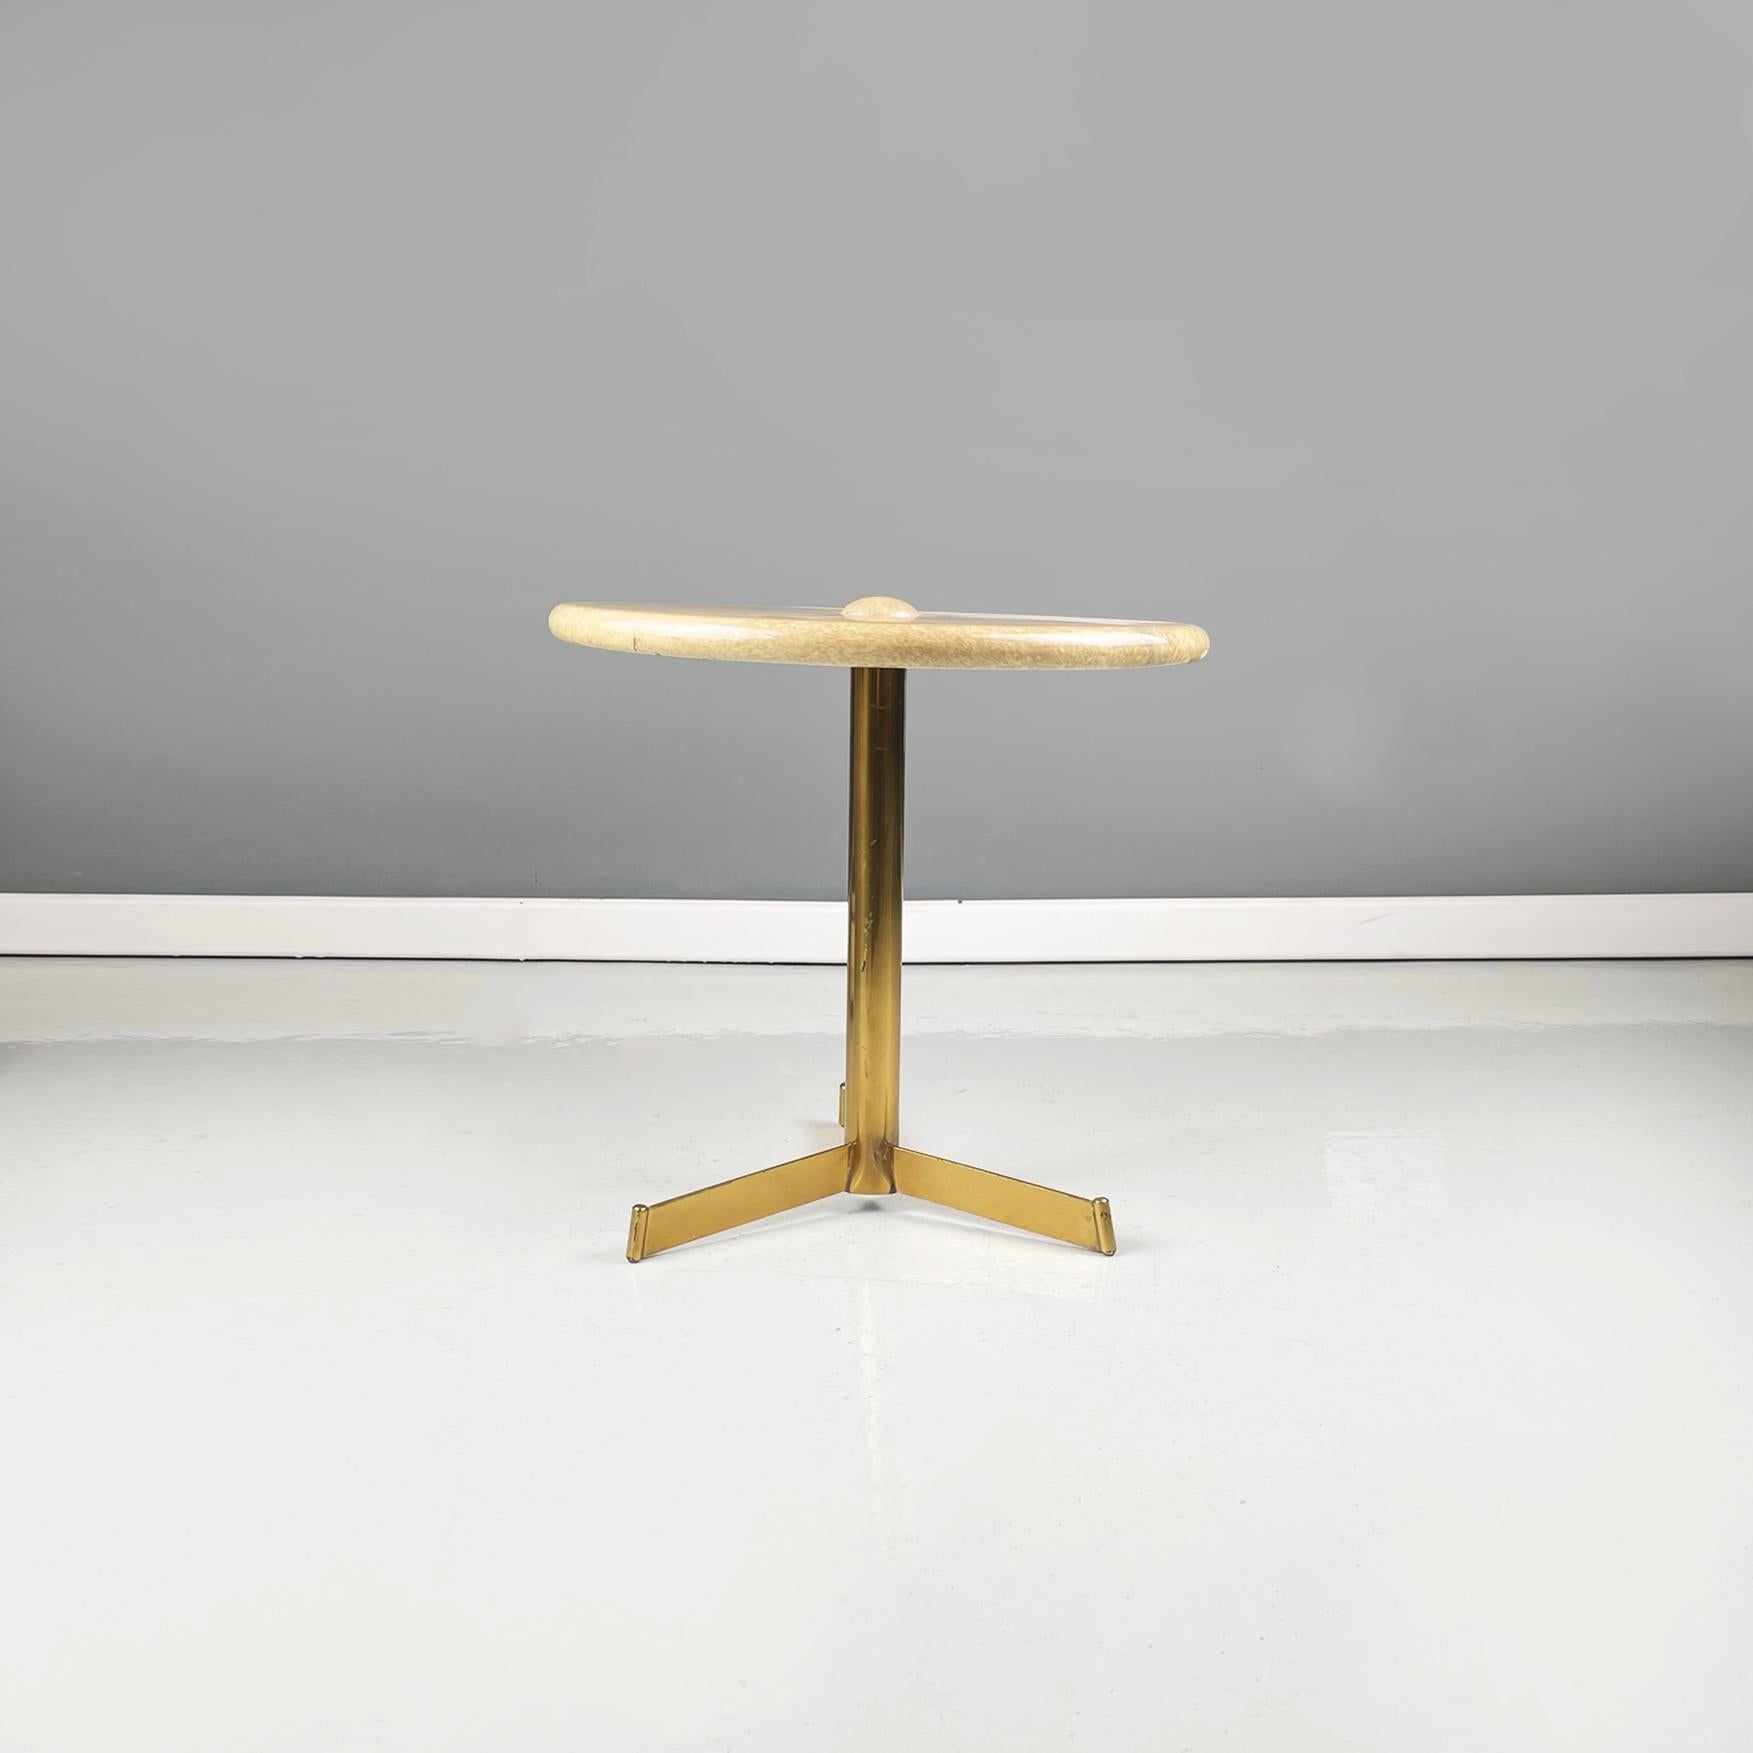 Italian Mid-Century Modern Coffee table in wood, parchment and brass by Aldo Tura, 1960s
Coffee table with round wooden top covered in beige-brown parchment. At the center of the round top there is a hemisphere. The central leg is in tubular with 3